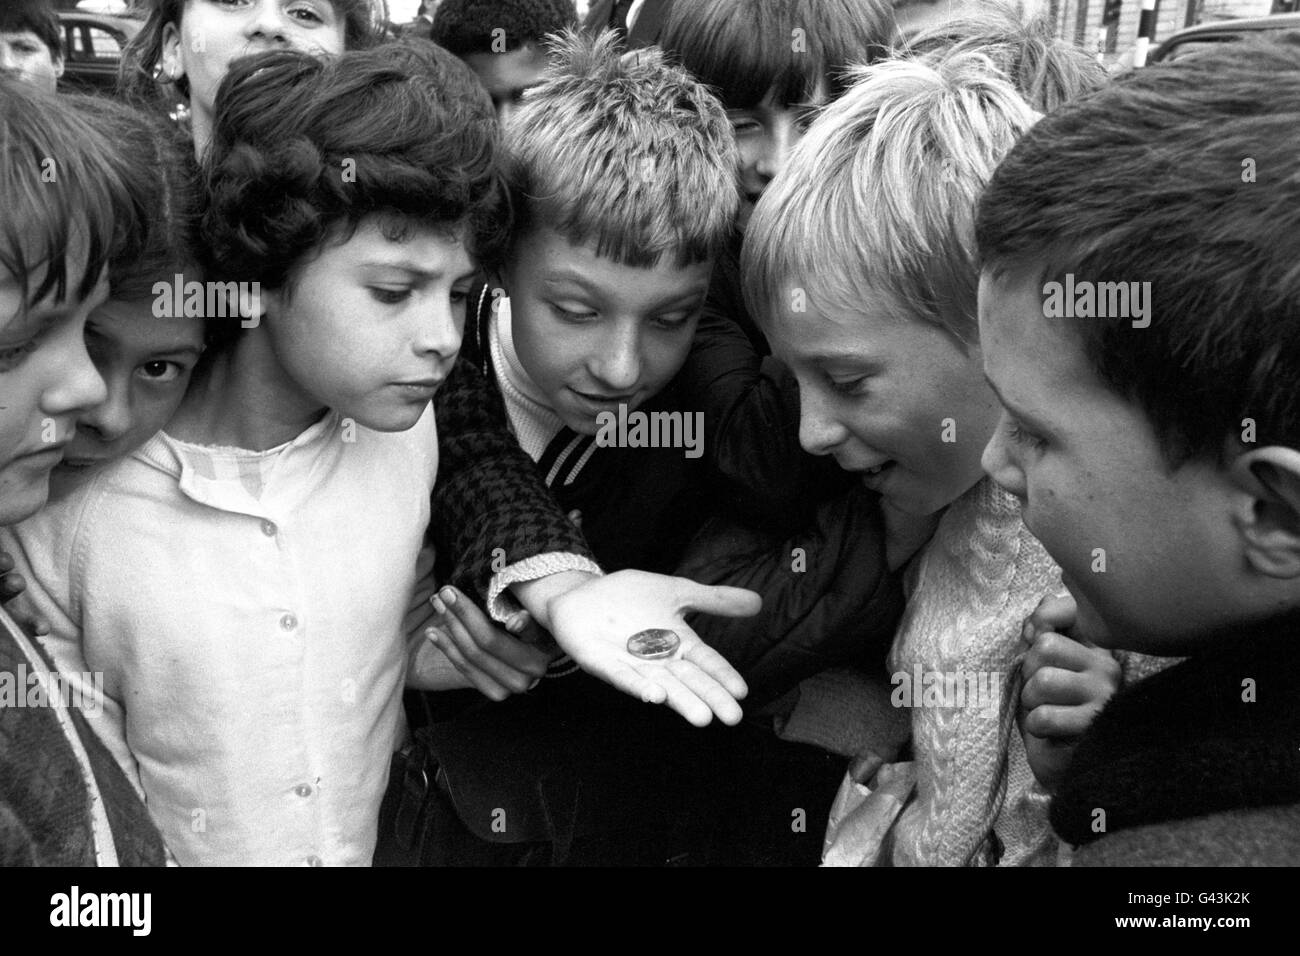 Children in Trafalgar Square, London looking at the new decimal 50 pence coin, the world's first seven sided coin. Stock Photo